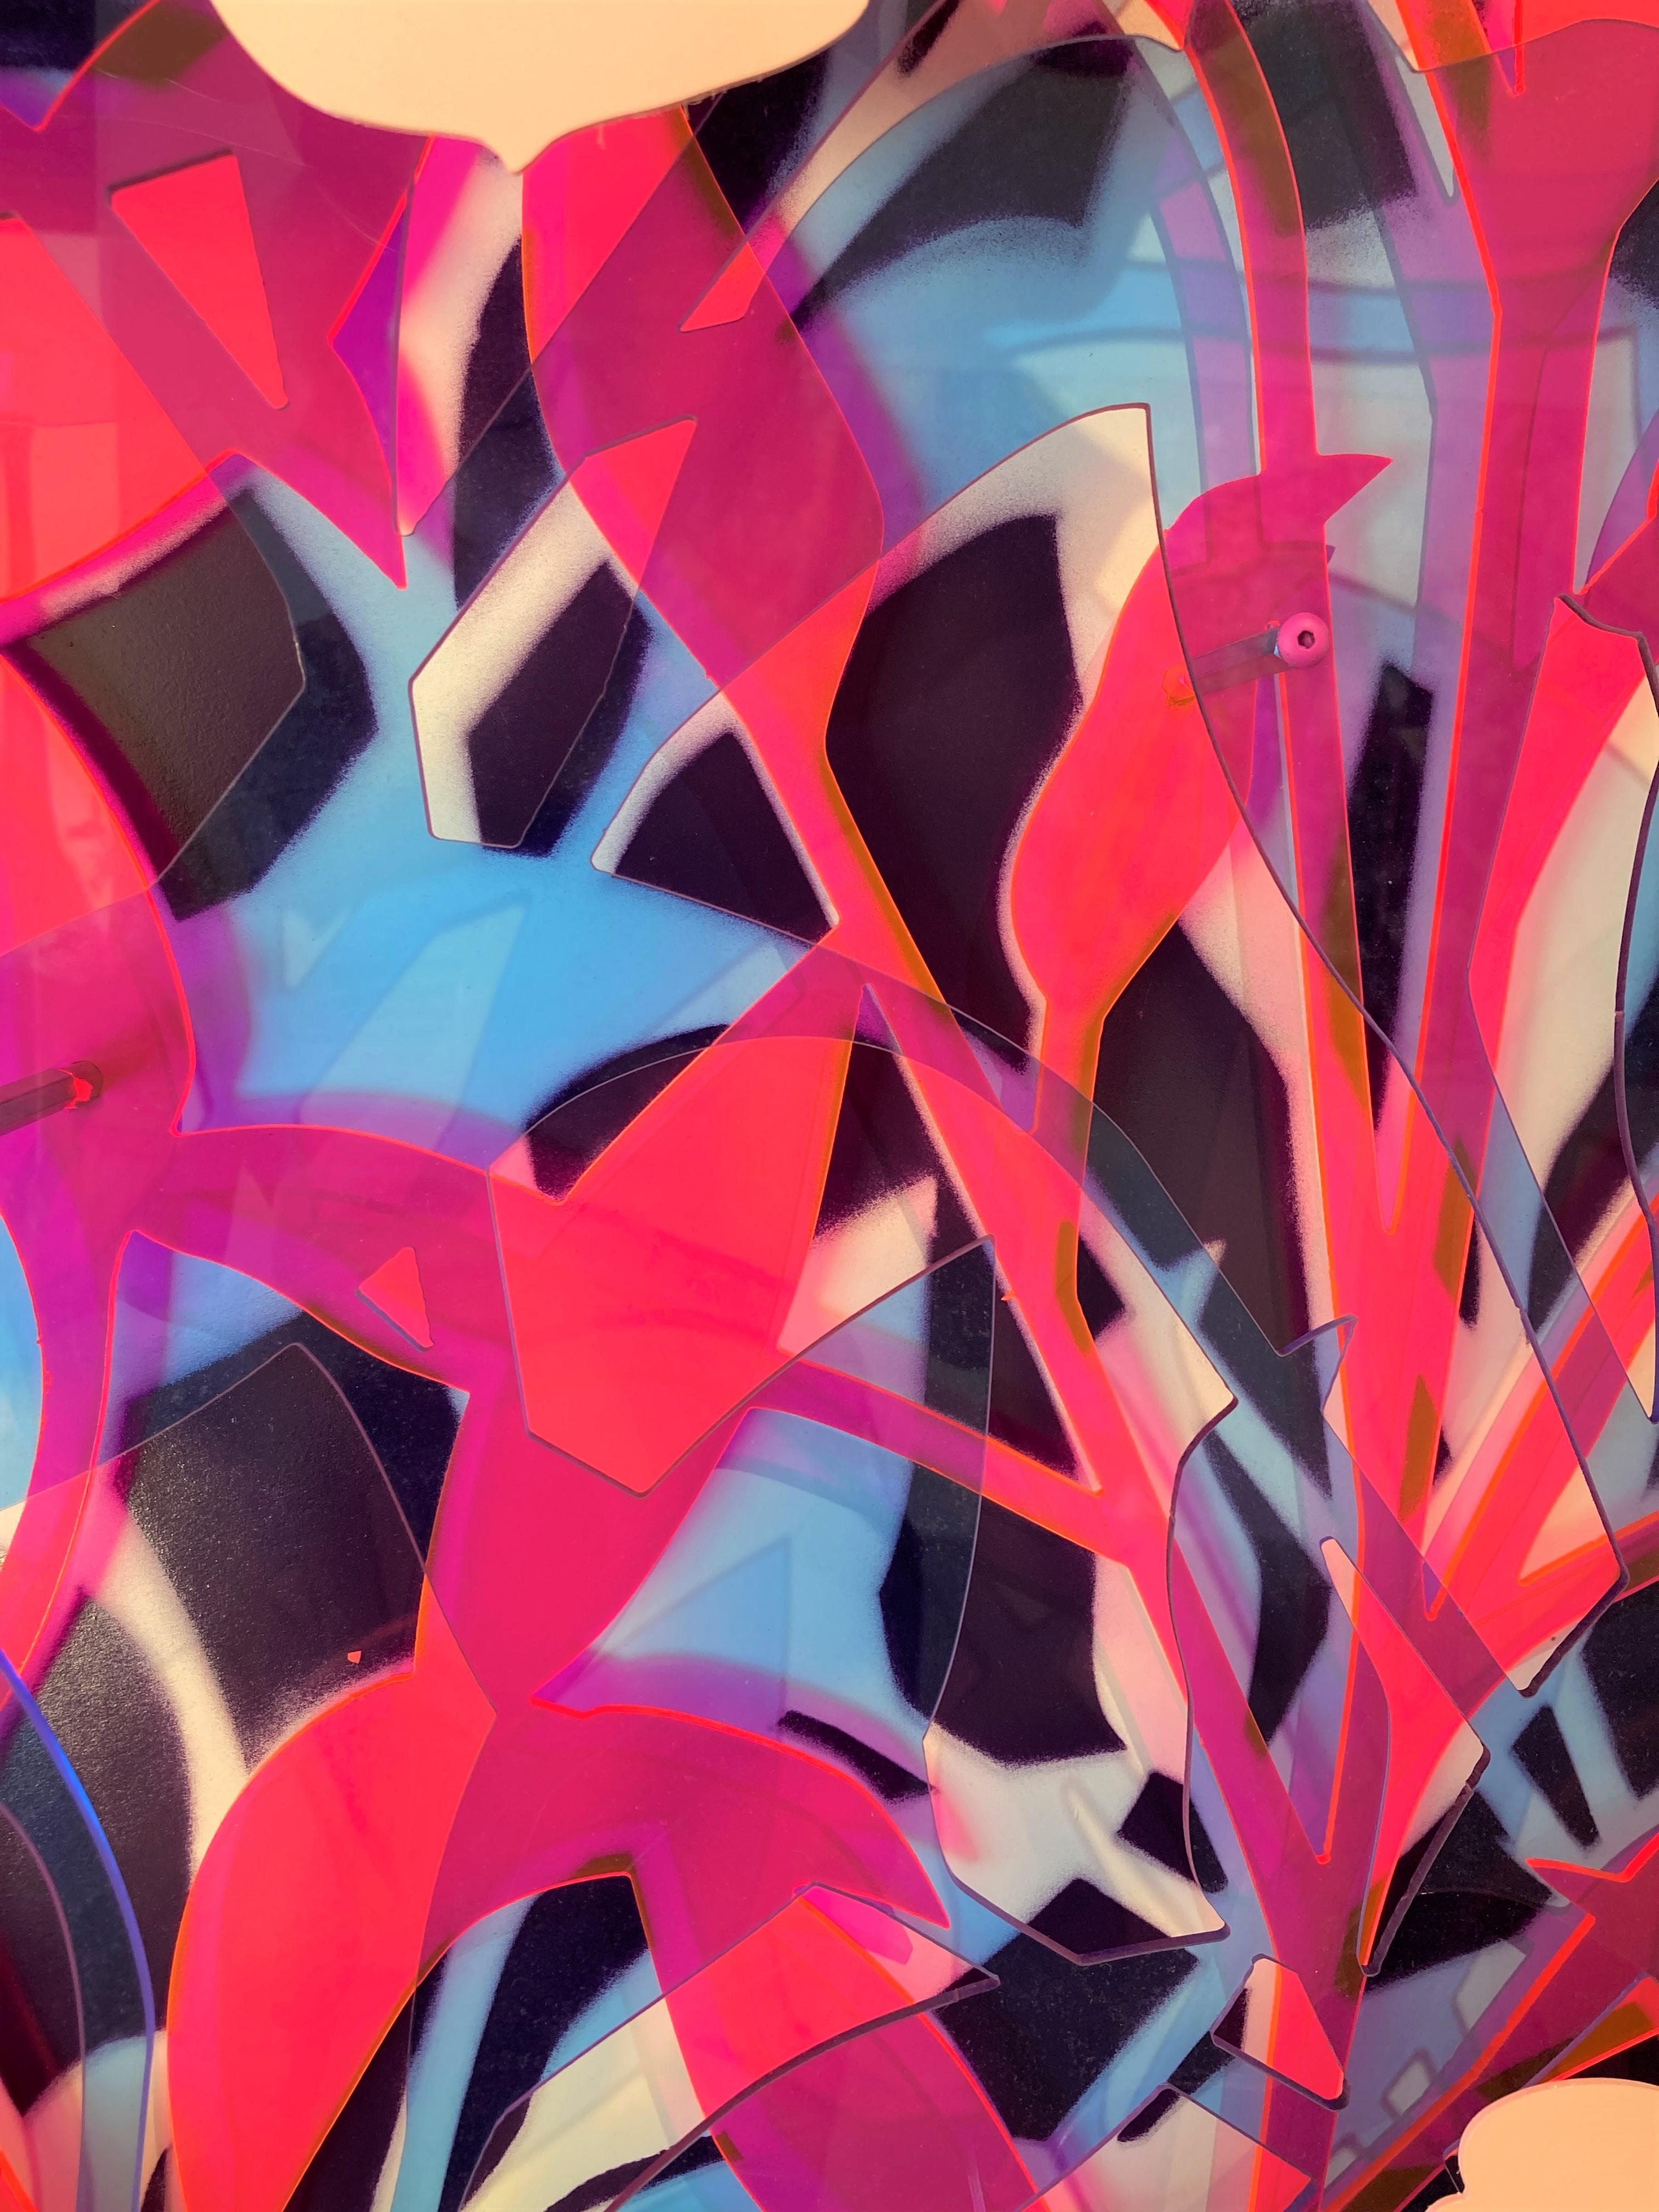 Flowers - Blue and Neon Pink - Abstract Painting by Michael Kalish